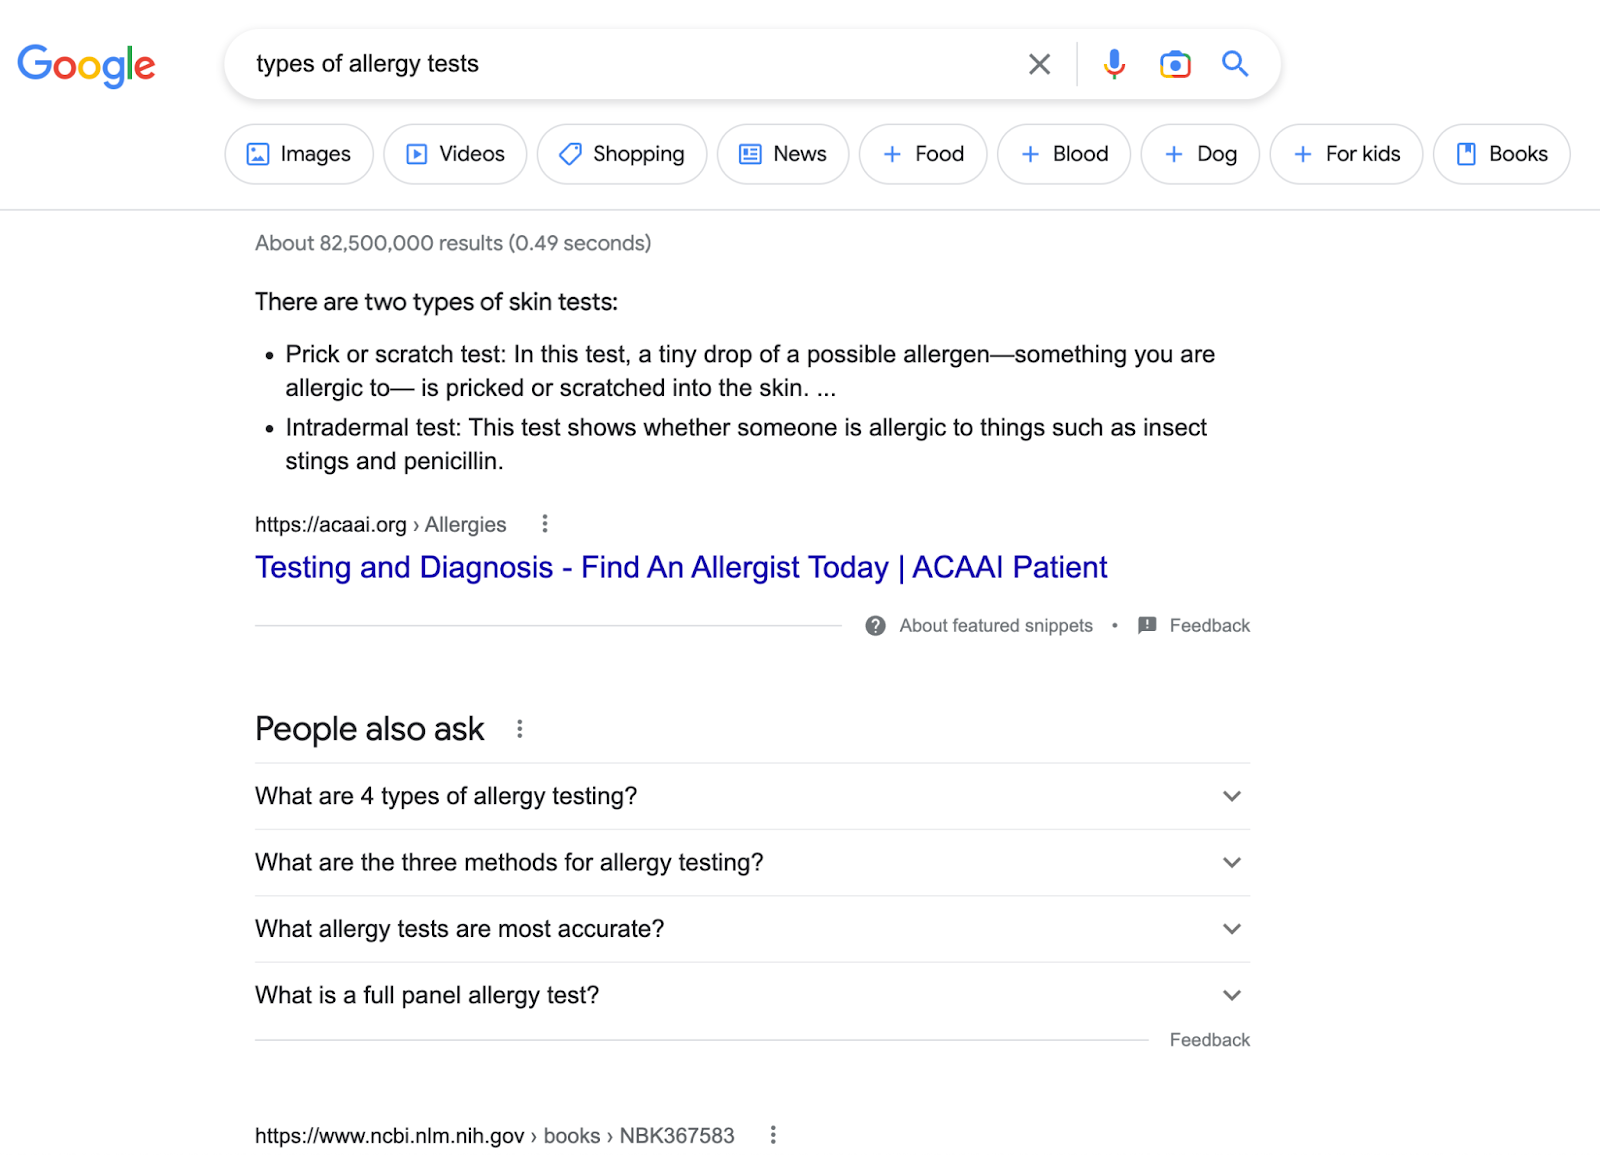 position zero example in SERPs showing a featured snippet and a people also ask box